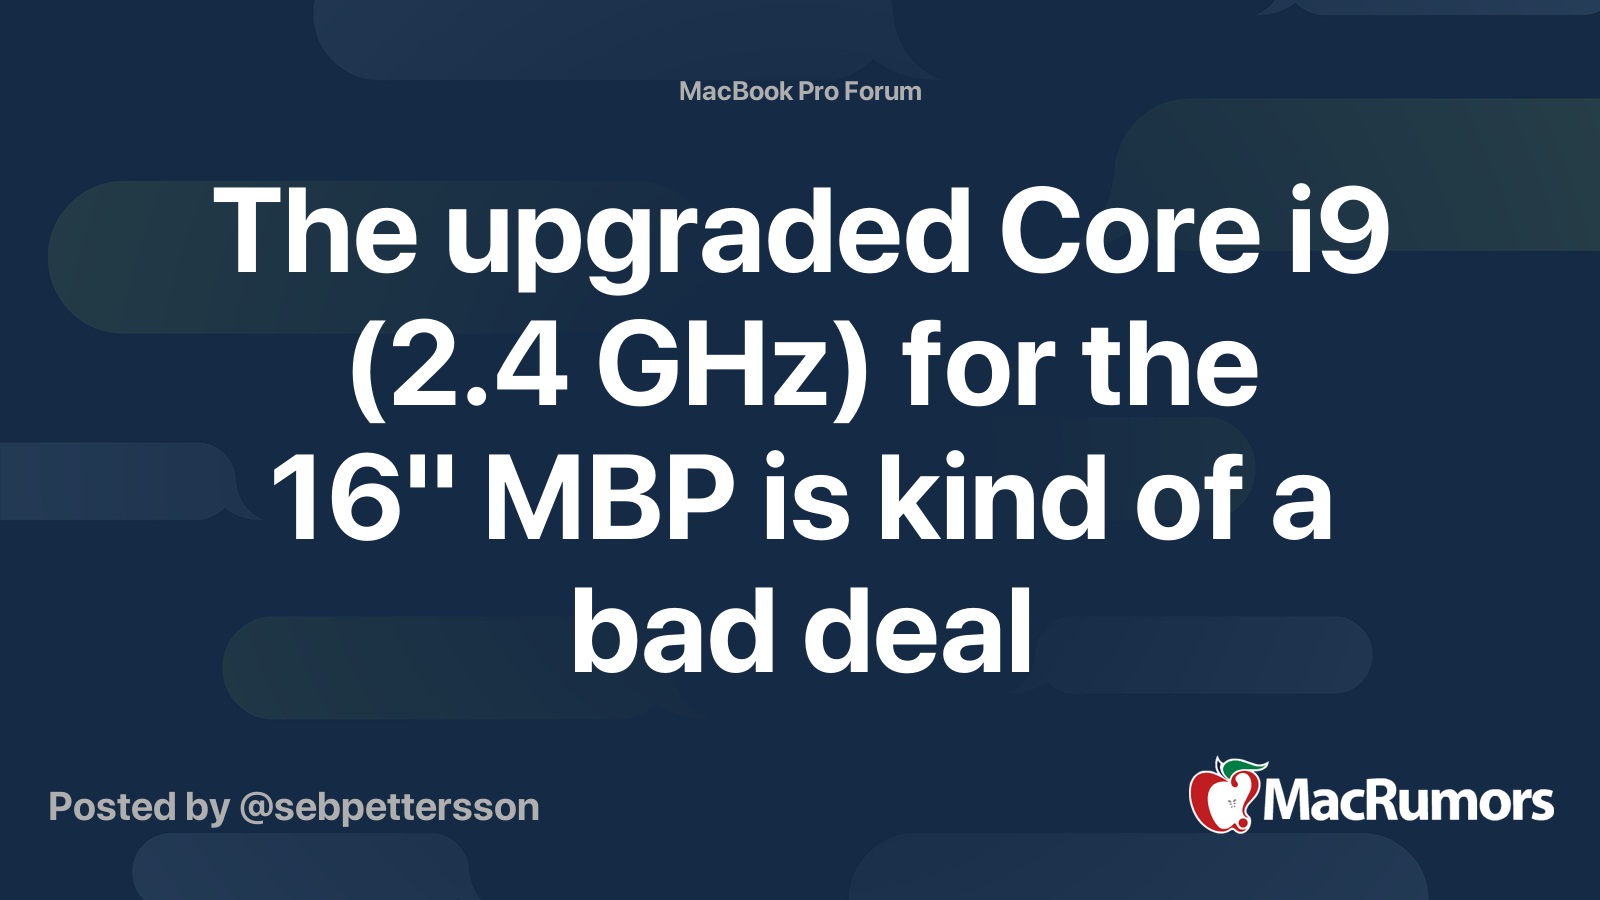 The upgraded Core i9 (2.4 GHz) for the 16